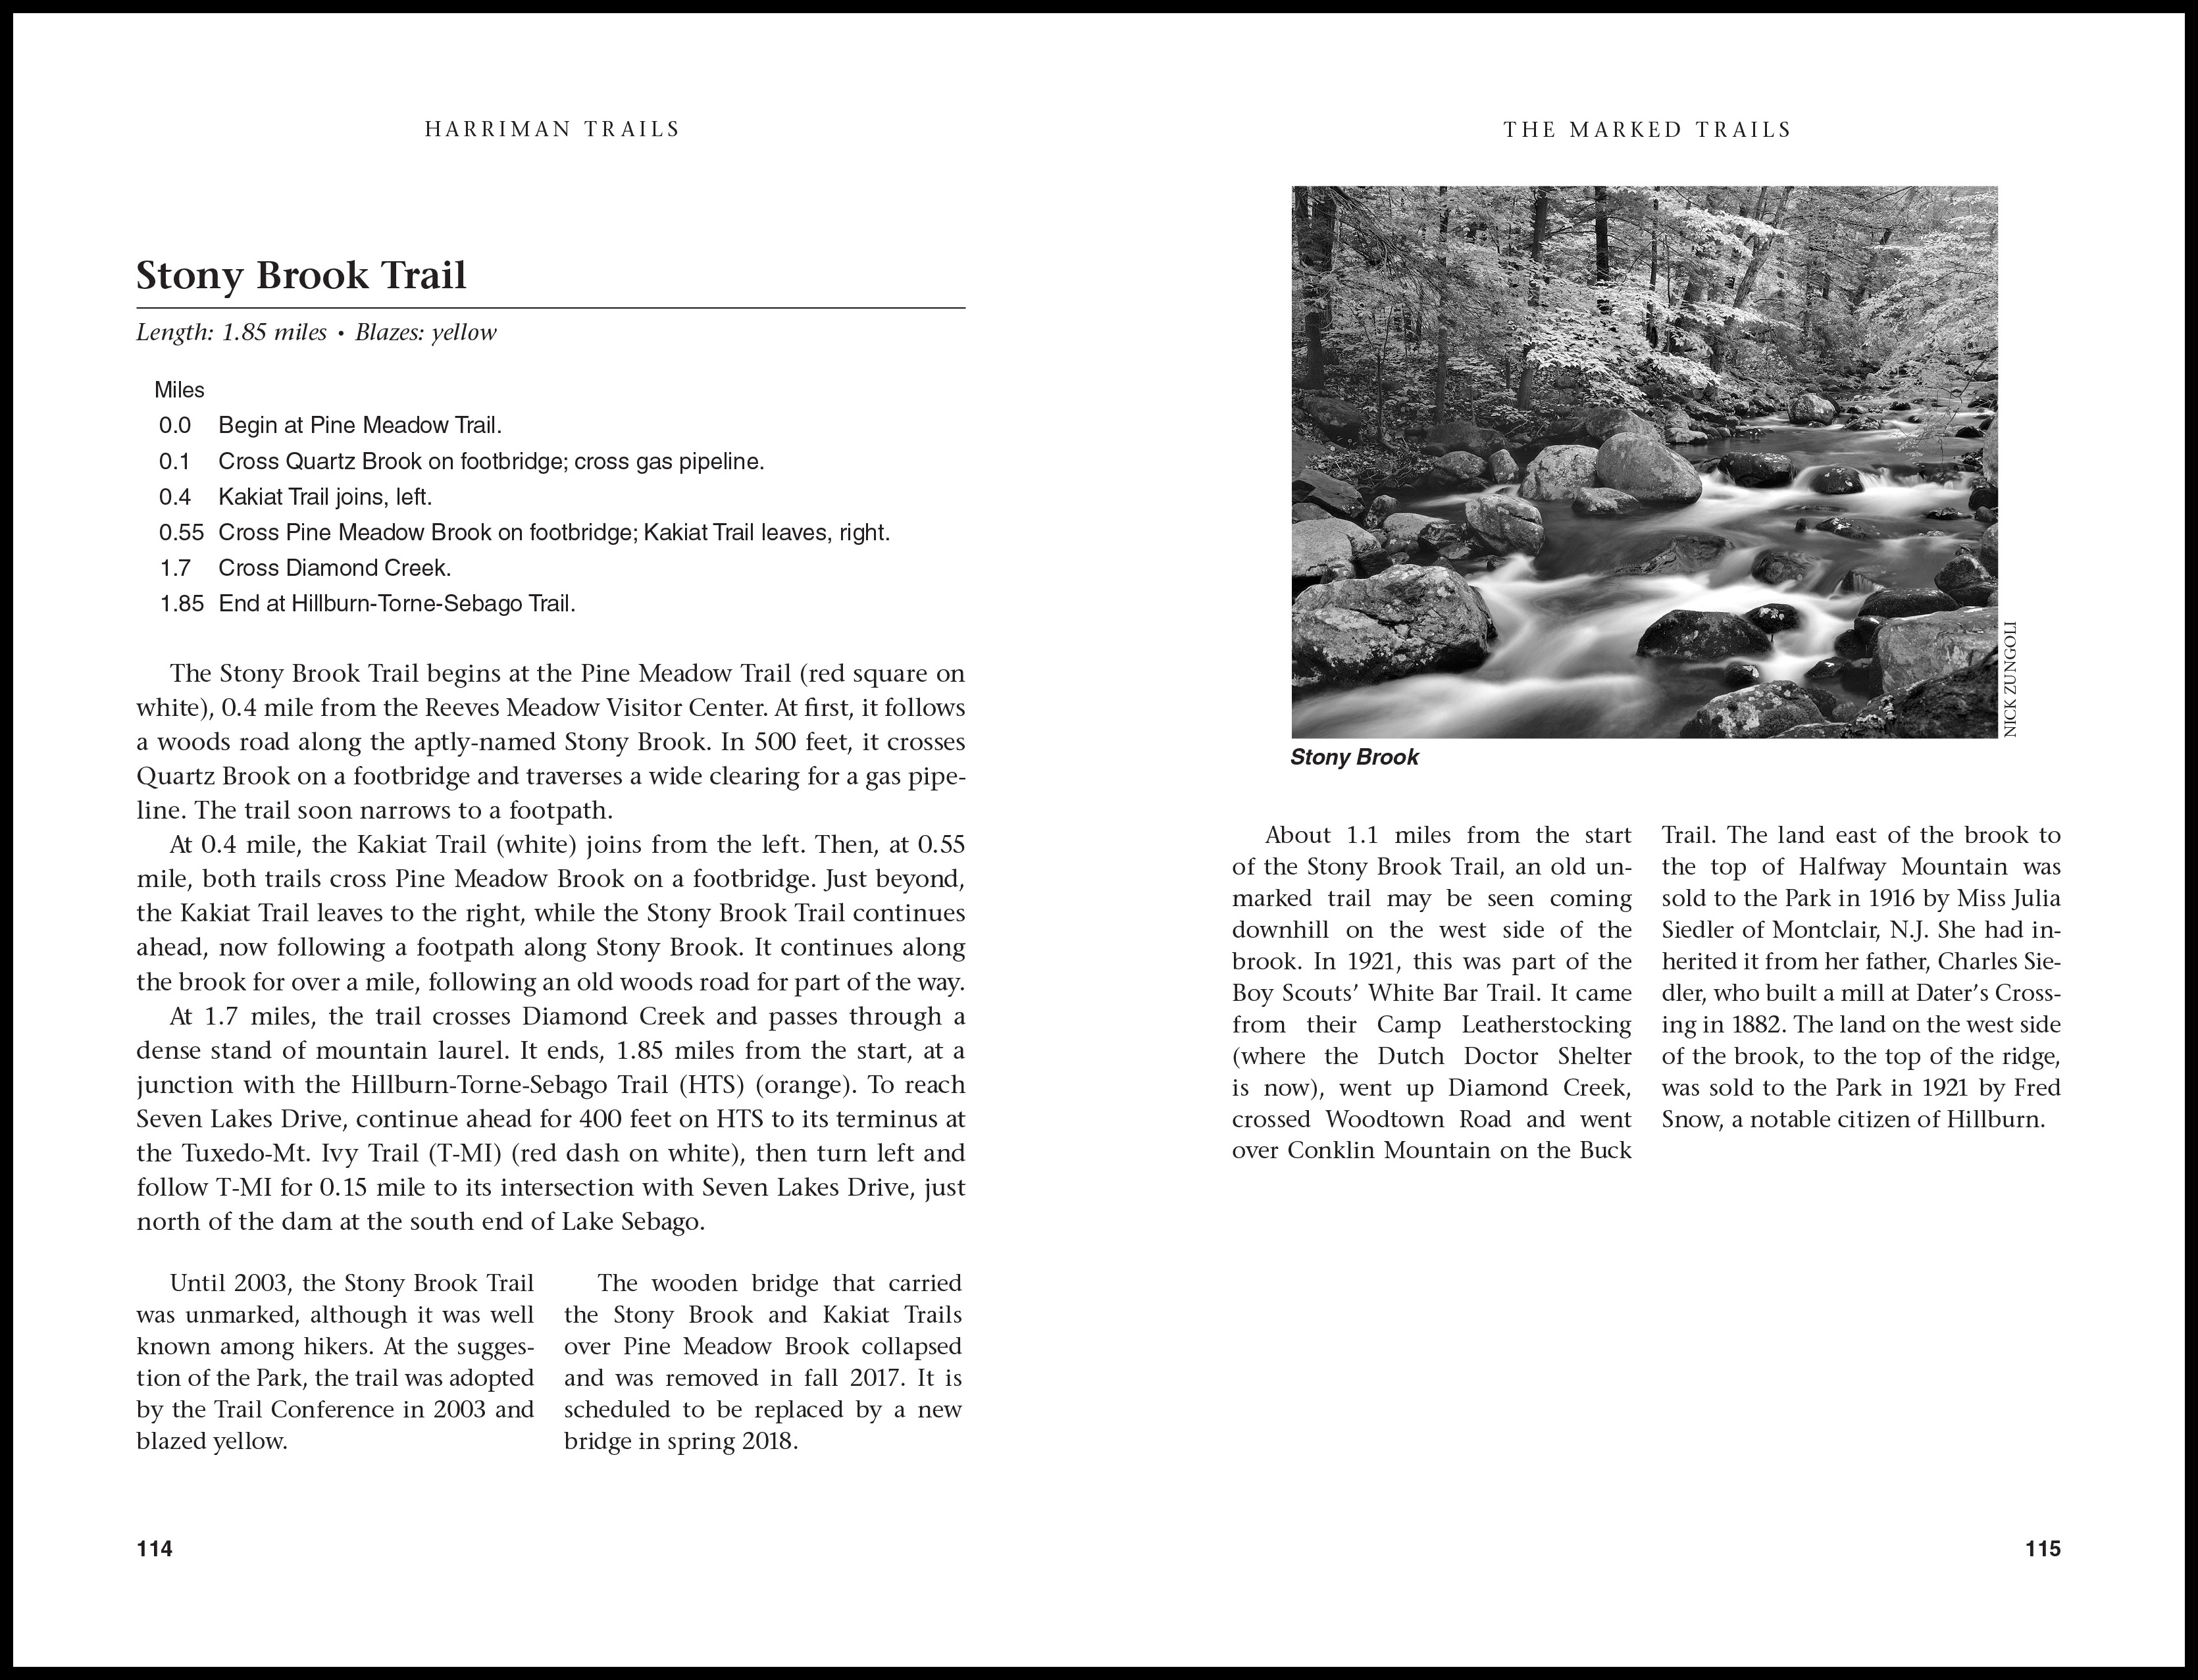 Example Chapter Spread of Harriman Trails 4th Edition Book